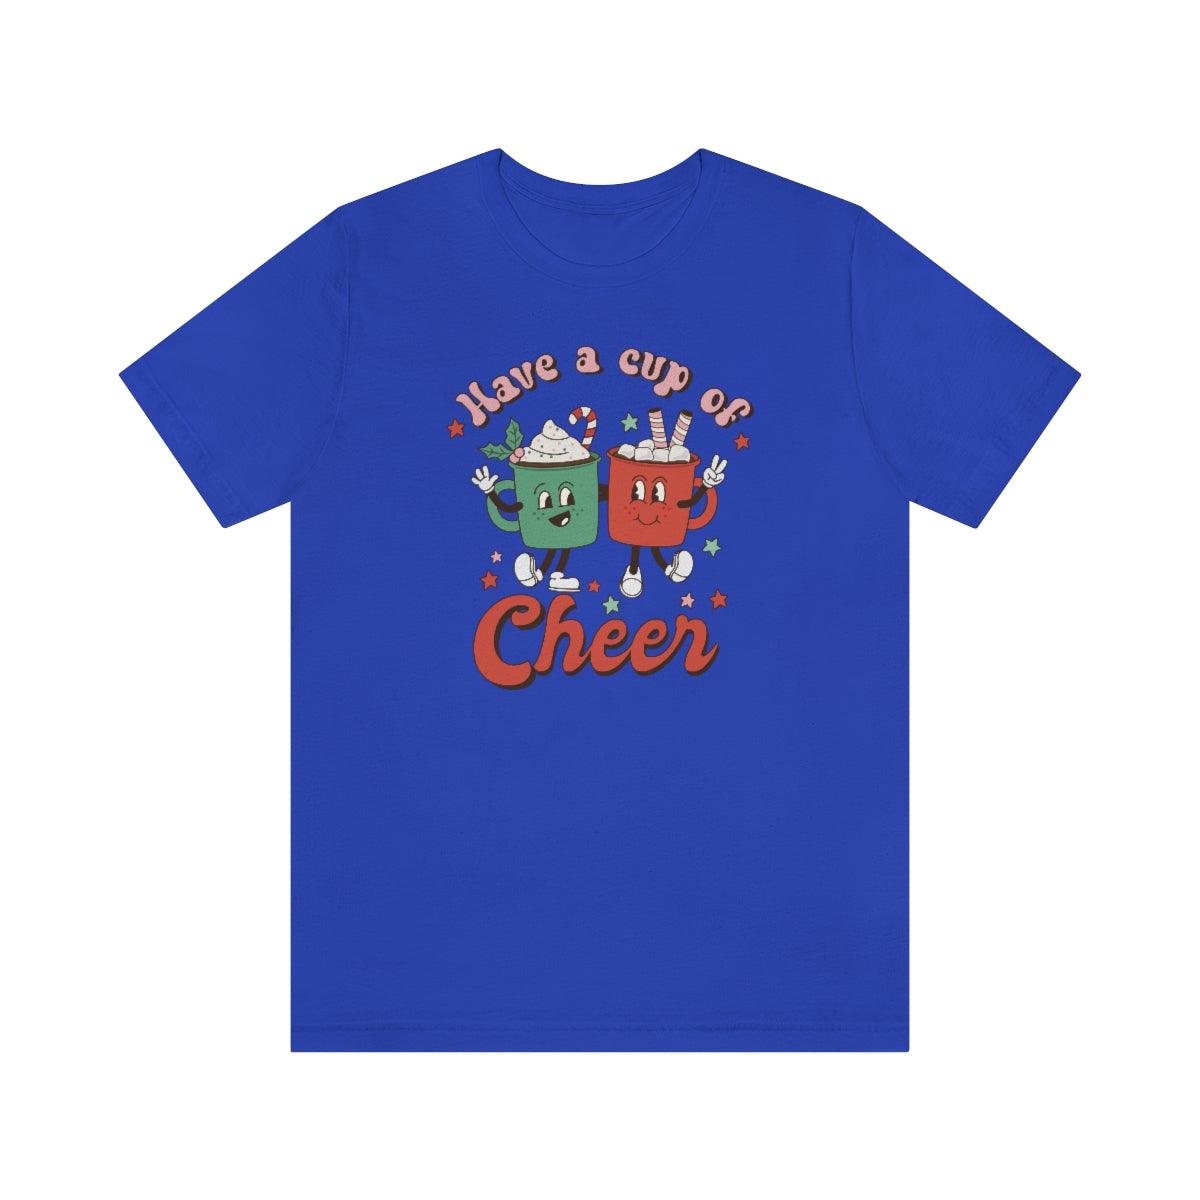 Retro Have a Cup of Christmas Cheer Christmas Shirt Short Sleeve Tee - Crystal Rose Design Co.